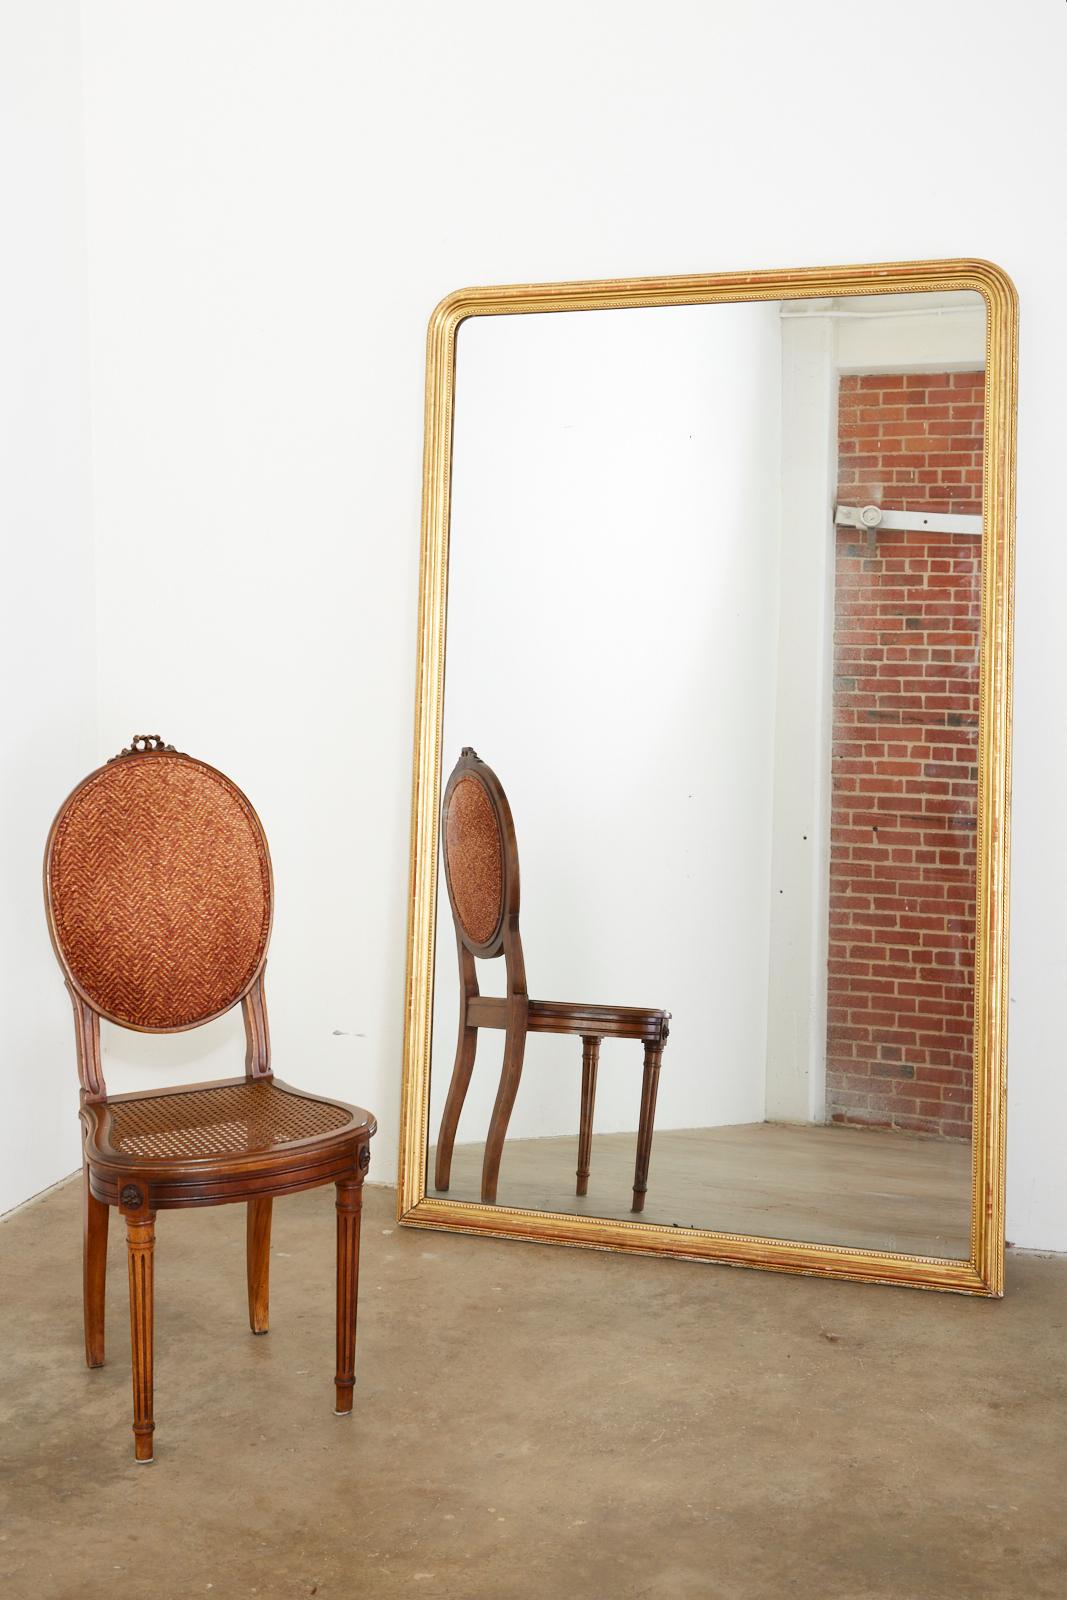 Large 19th century French Louis Phillippe pier mirror or floor mirror. Features a beautifully decorated giltwood frame with an inner beaded border and a rope motif trim on the edges. Rich, aged patina on the giltwood finish. From an estate in